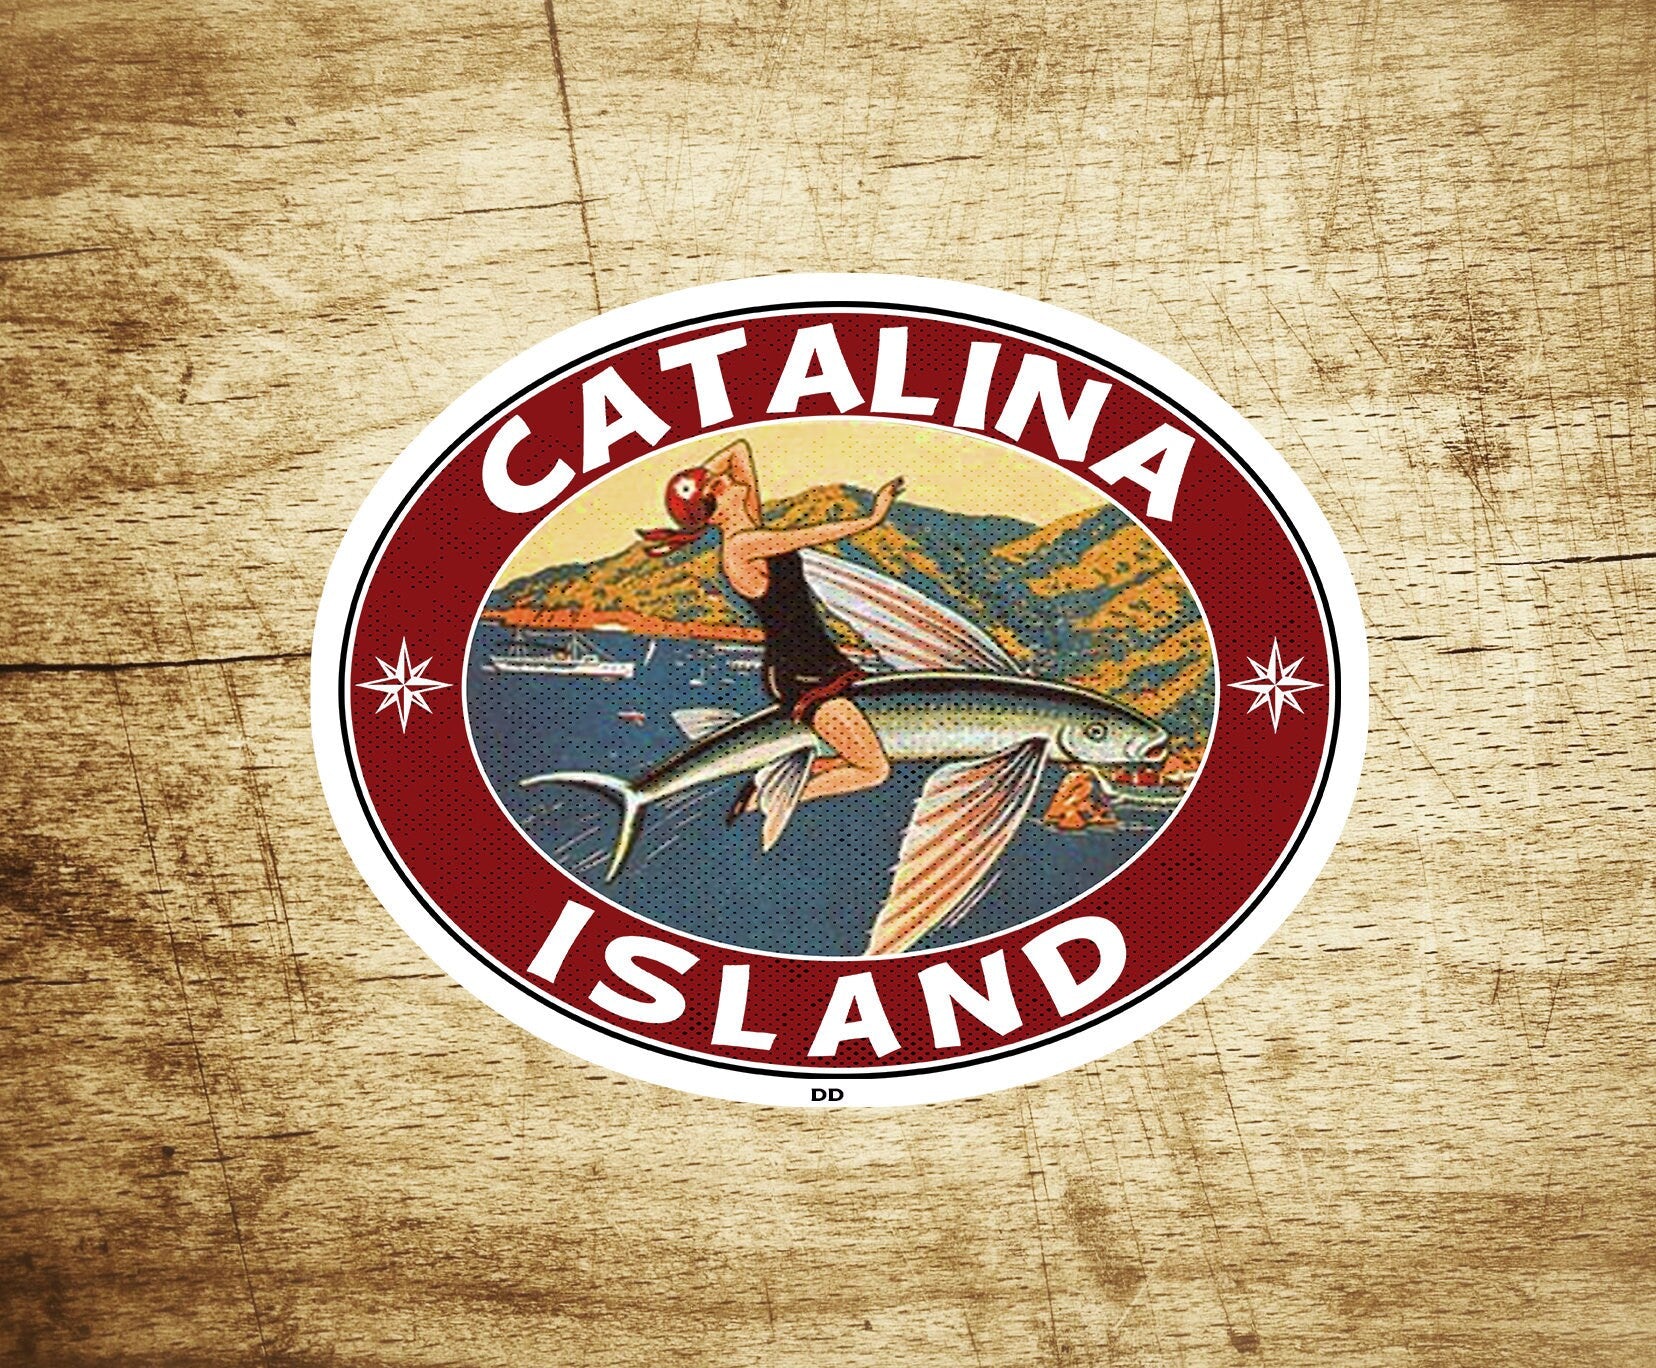 Catalina Island California Decal Sticker 3.5" X 2.75" Vintage Style Flying Fish